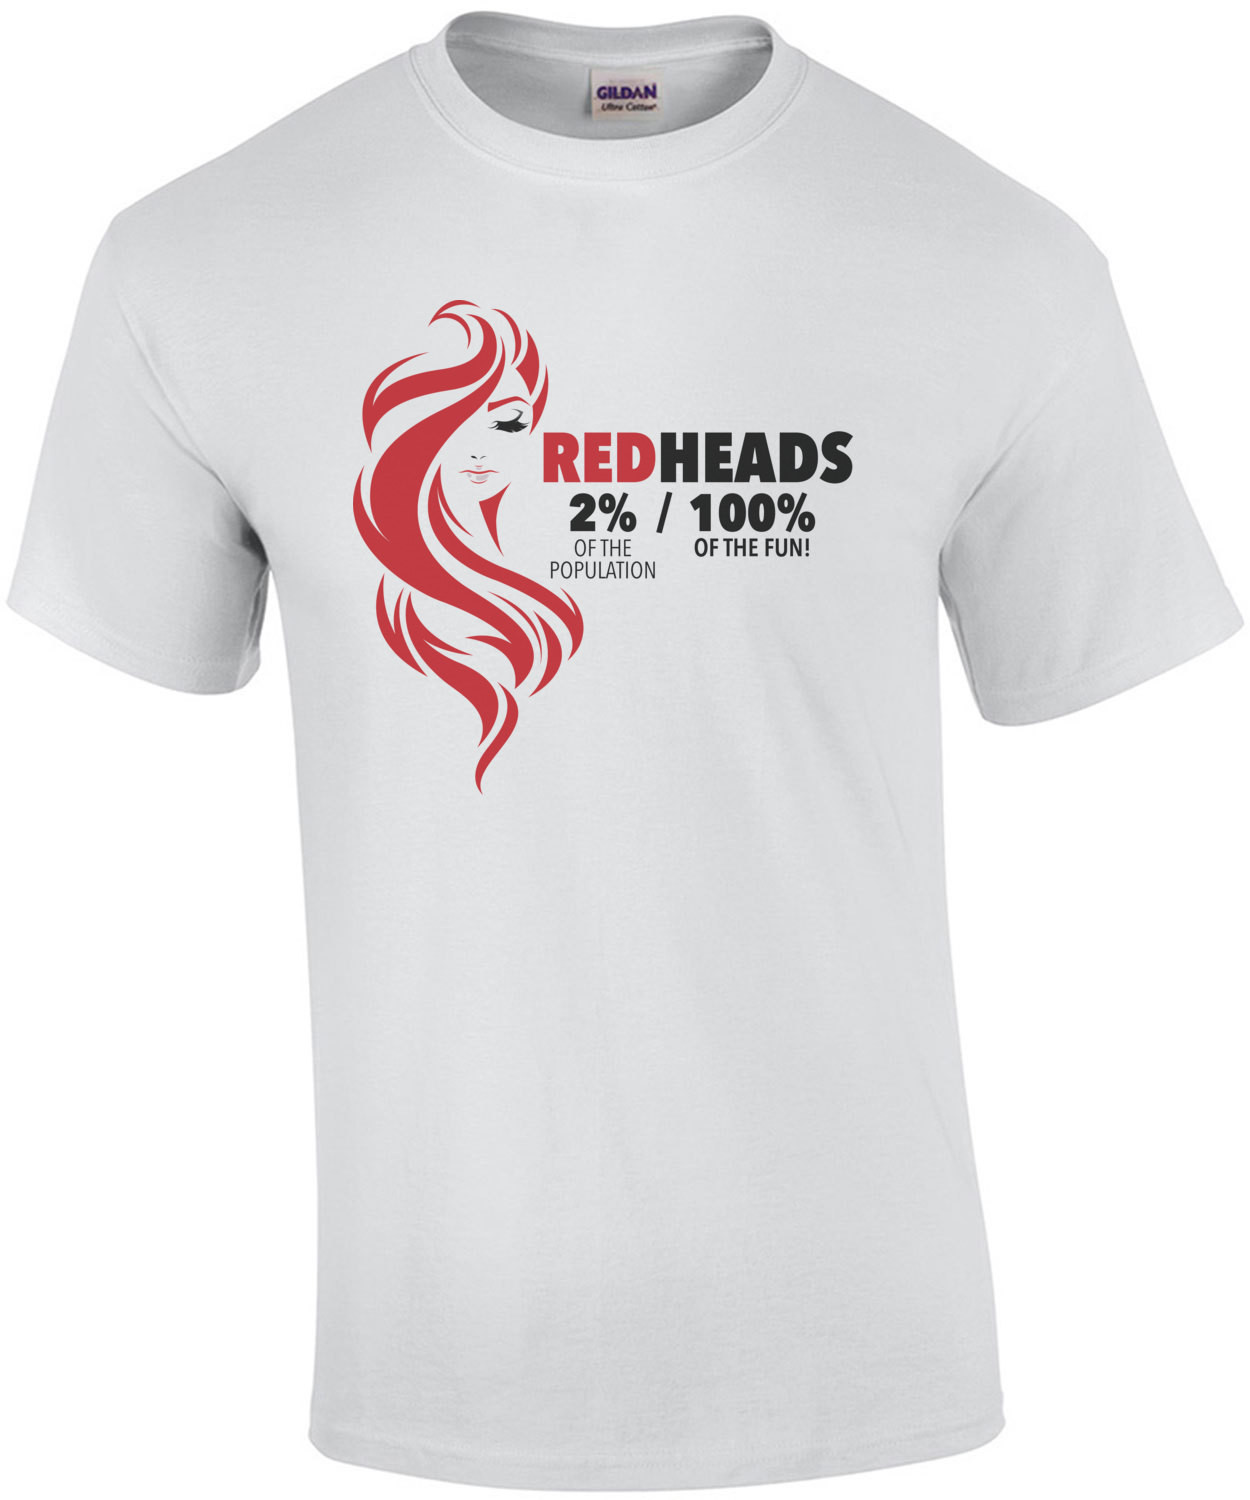 Redheads 2% of the population - 100% of the fun! - ladies t-shirt